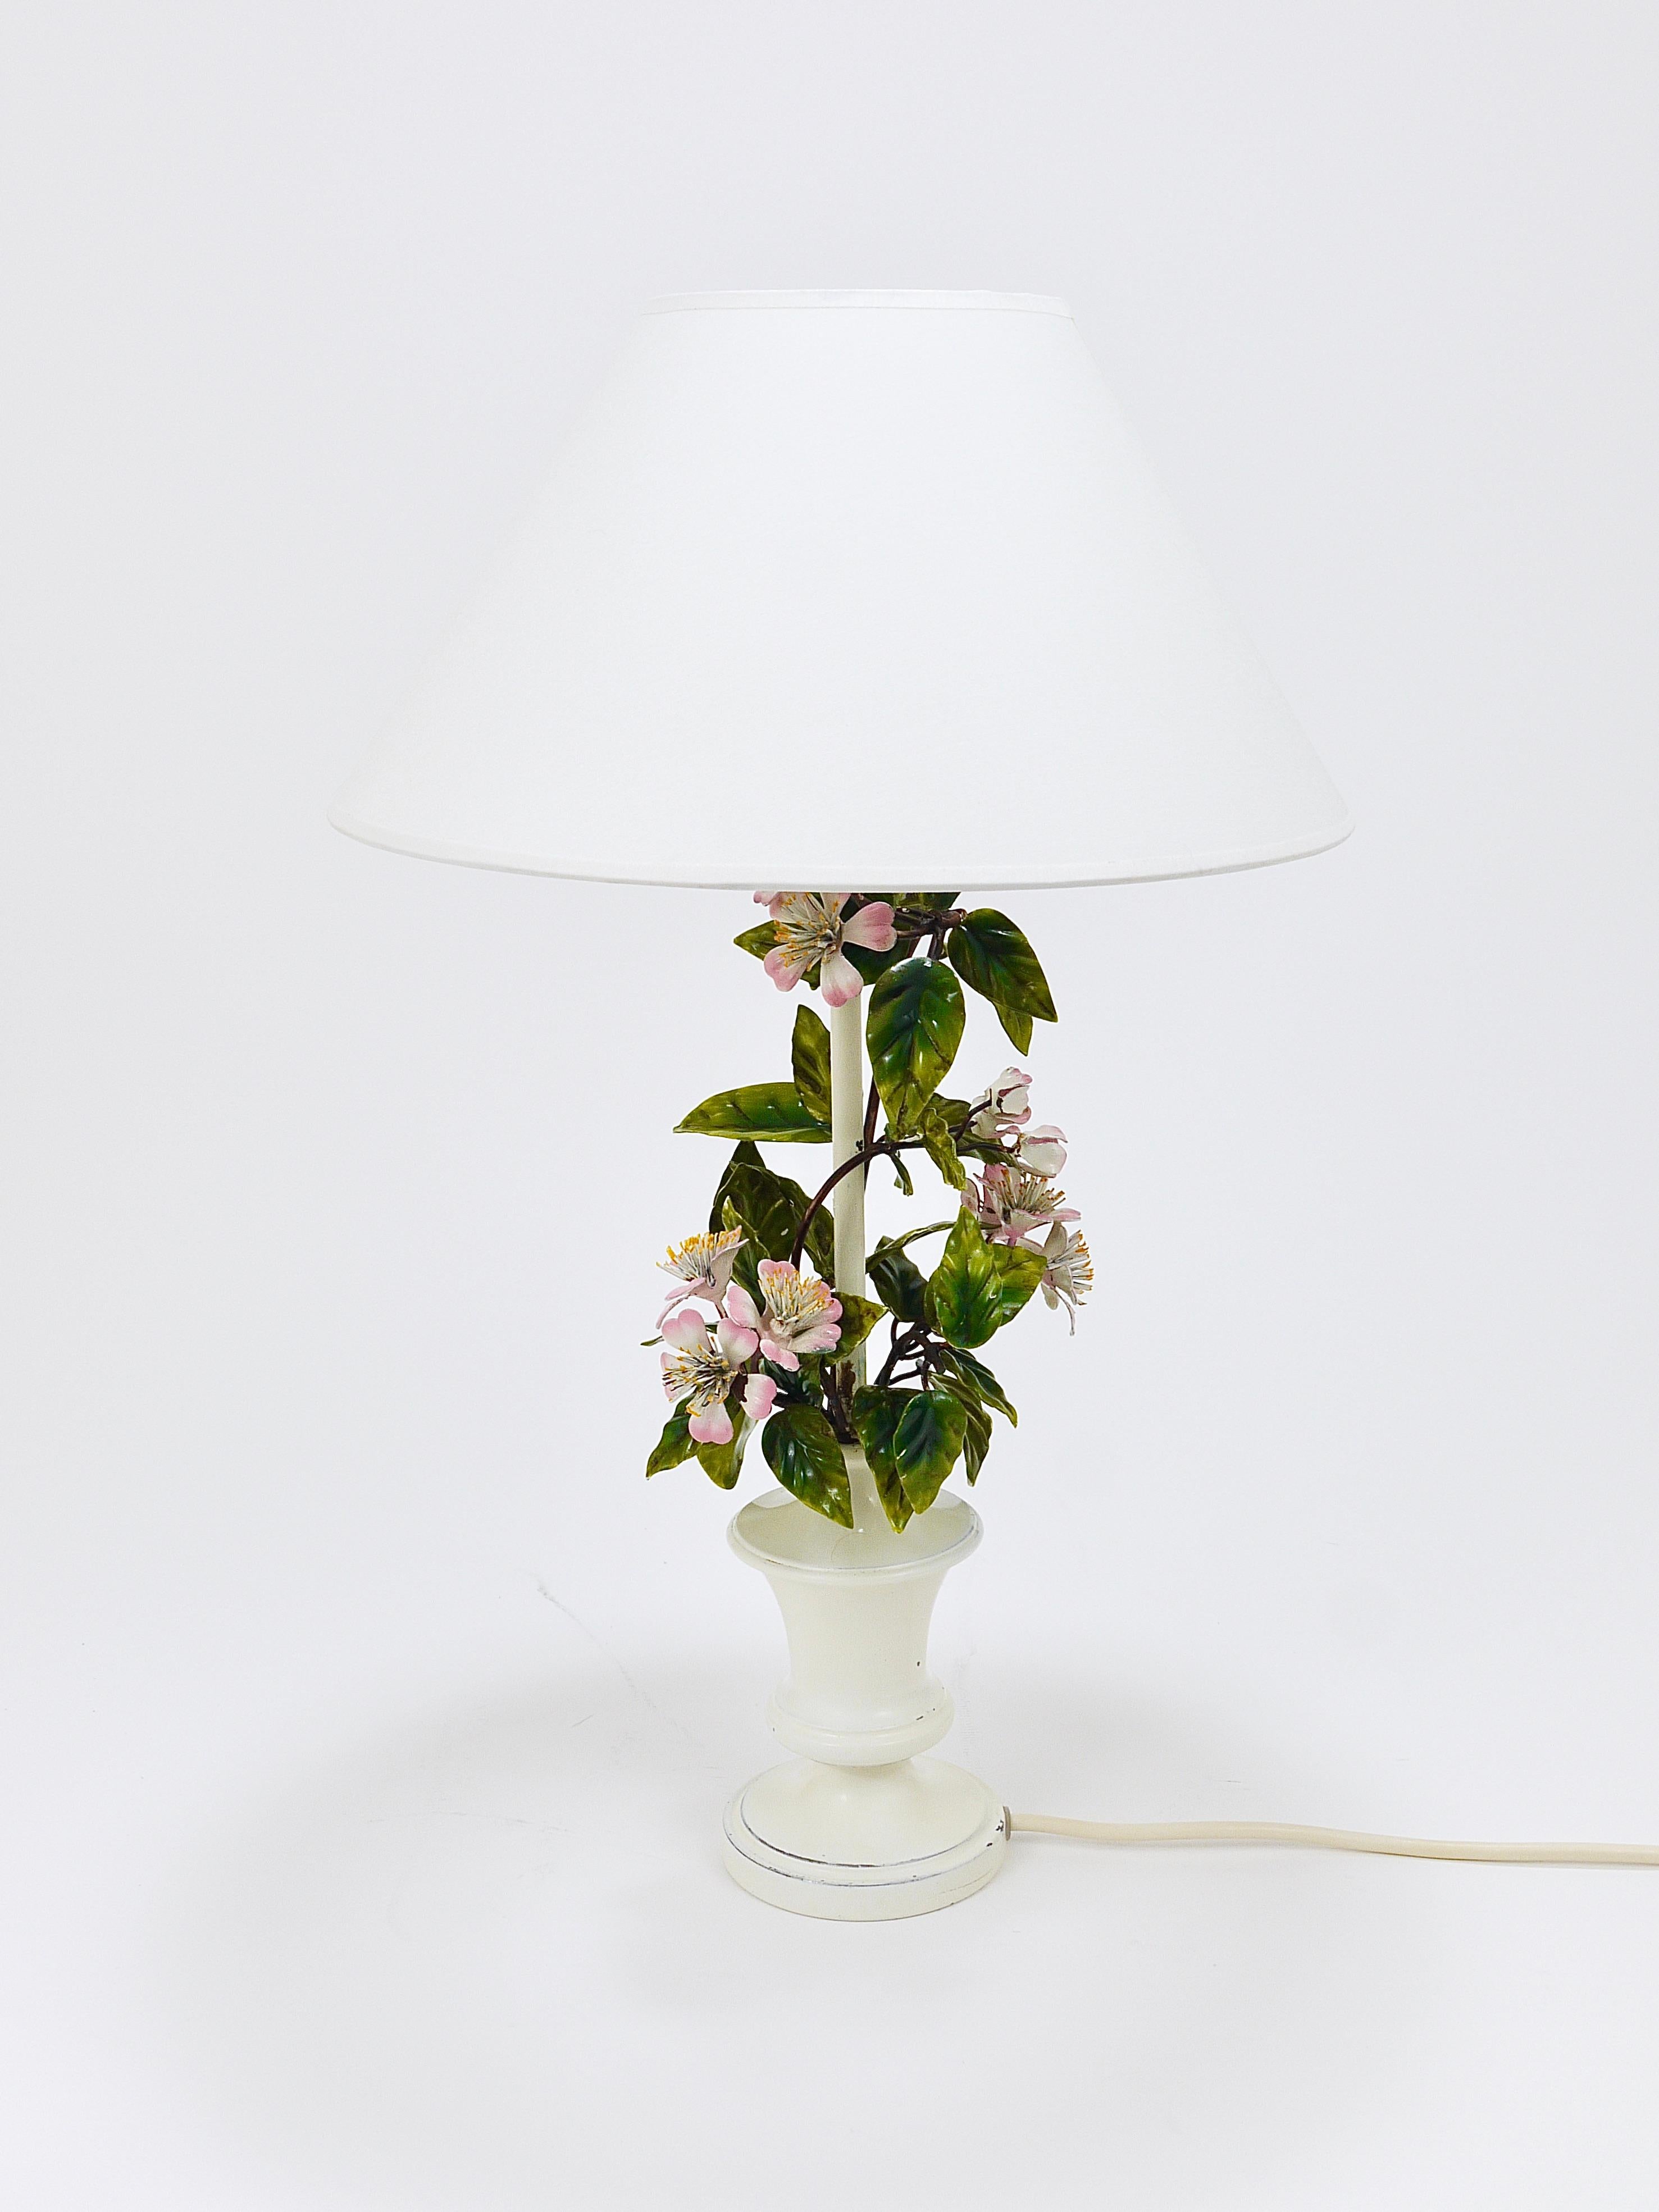 Salvadori Hand Painted Wild Apple Blossom Toleware Table Lamp, Italy, 1950s In Good Condition For Sale In Vienna, AT